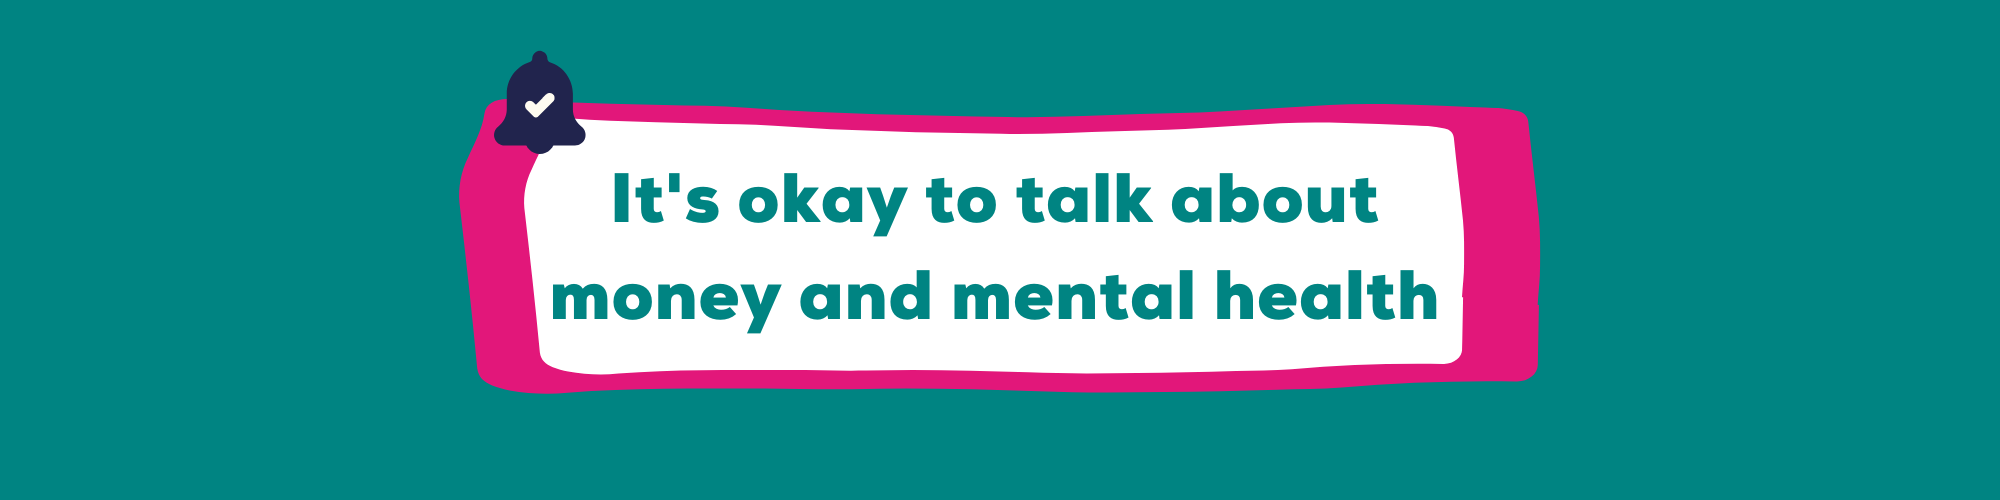 It's okay to talk about money and mental health